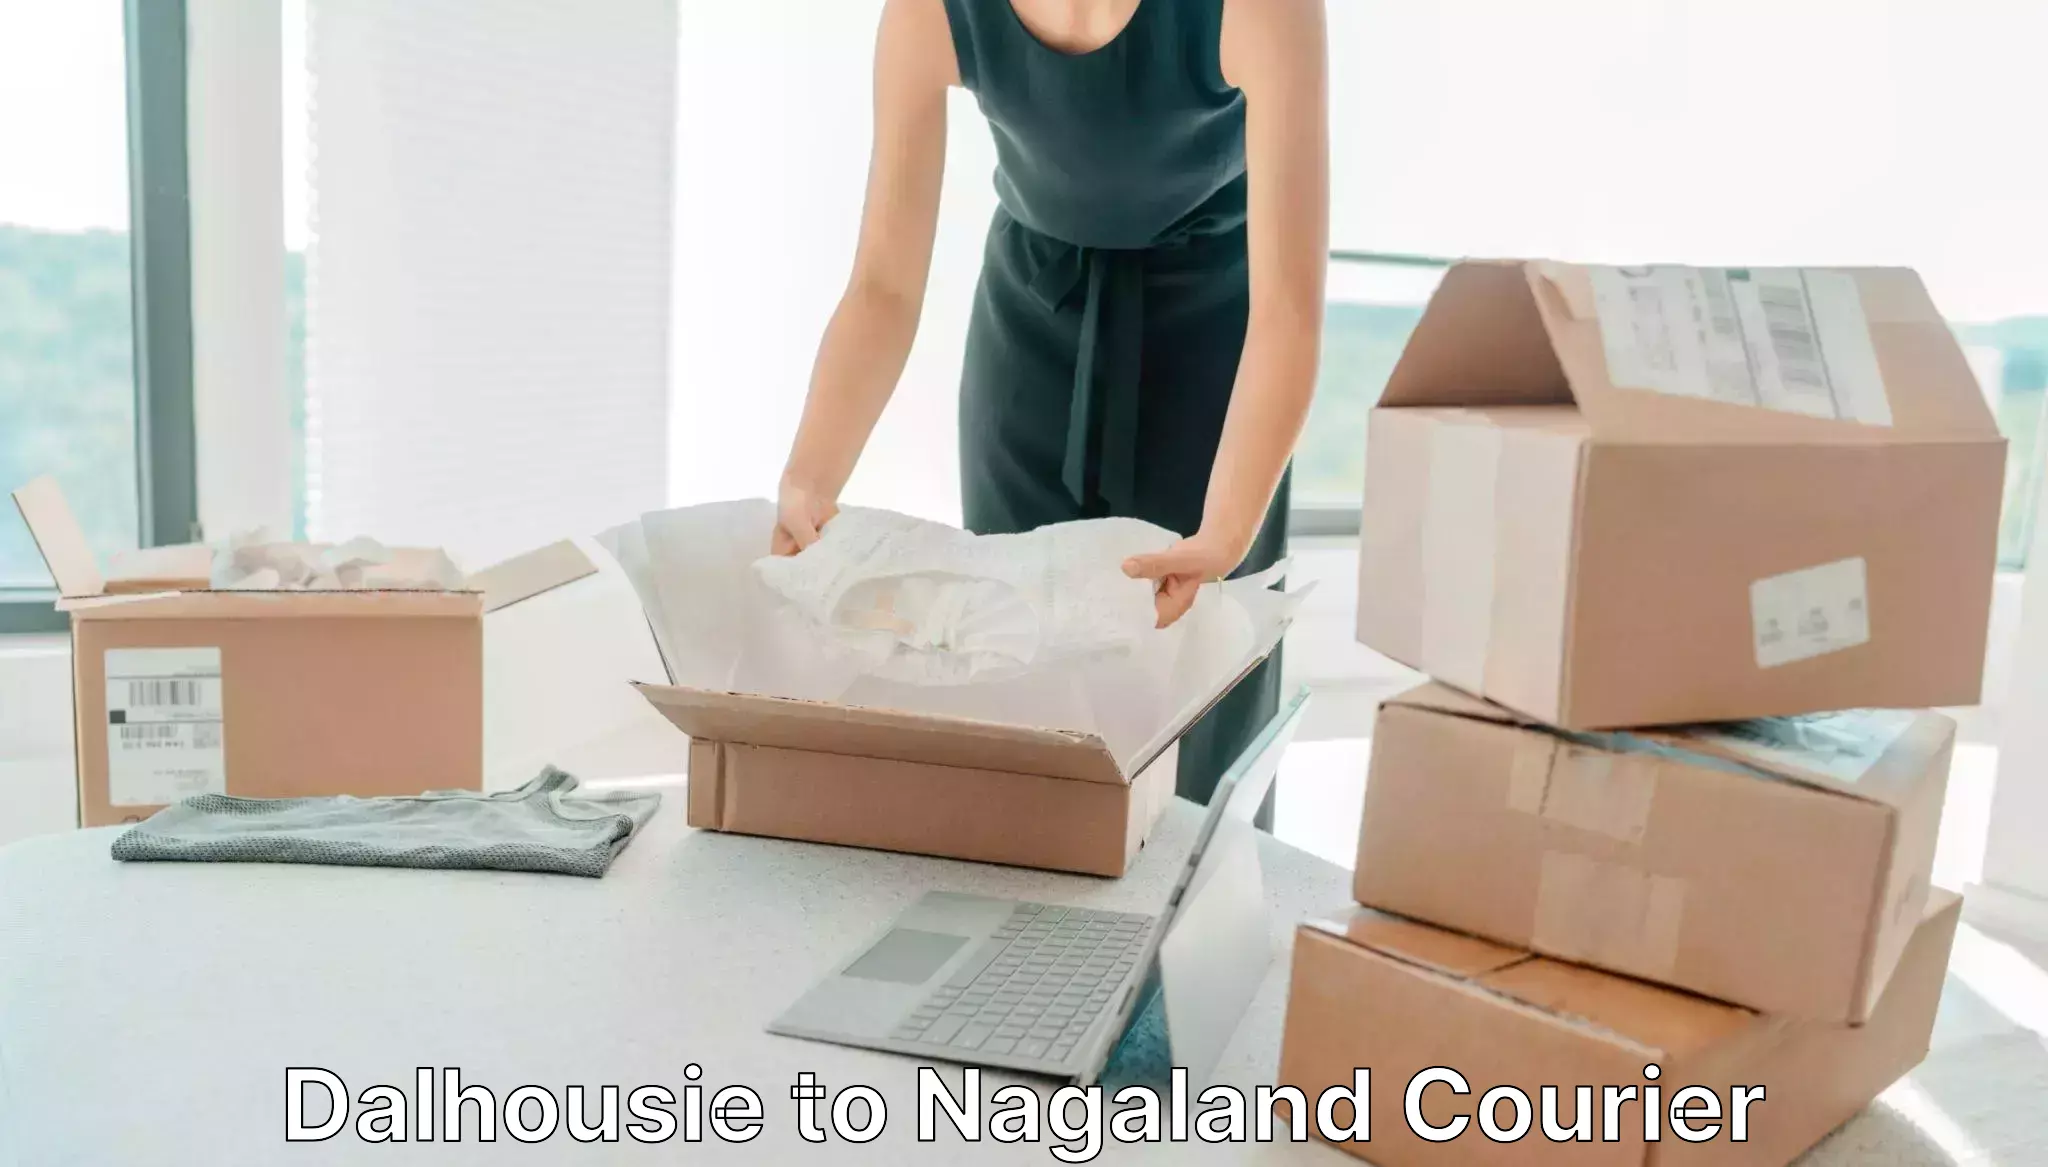 State-of-the-art courier technology Dalhousie to Nagaland